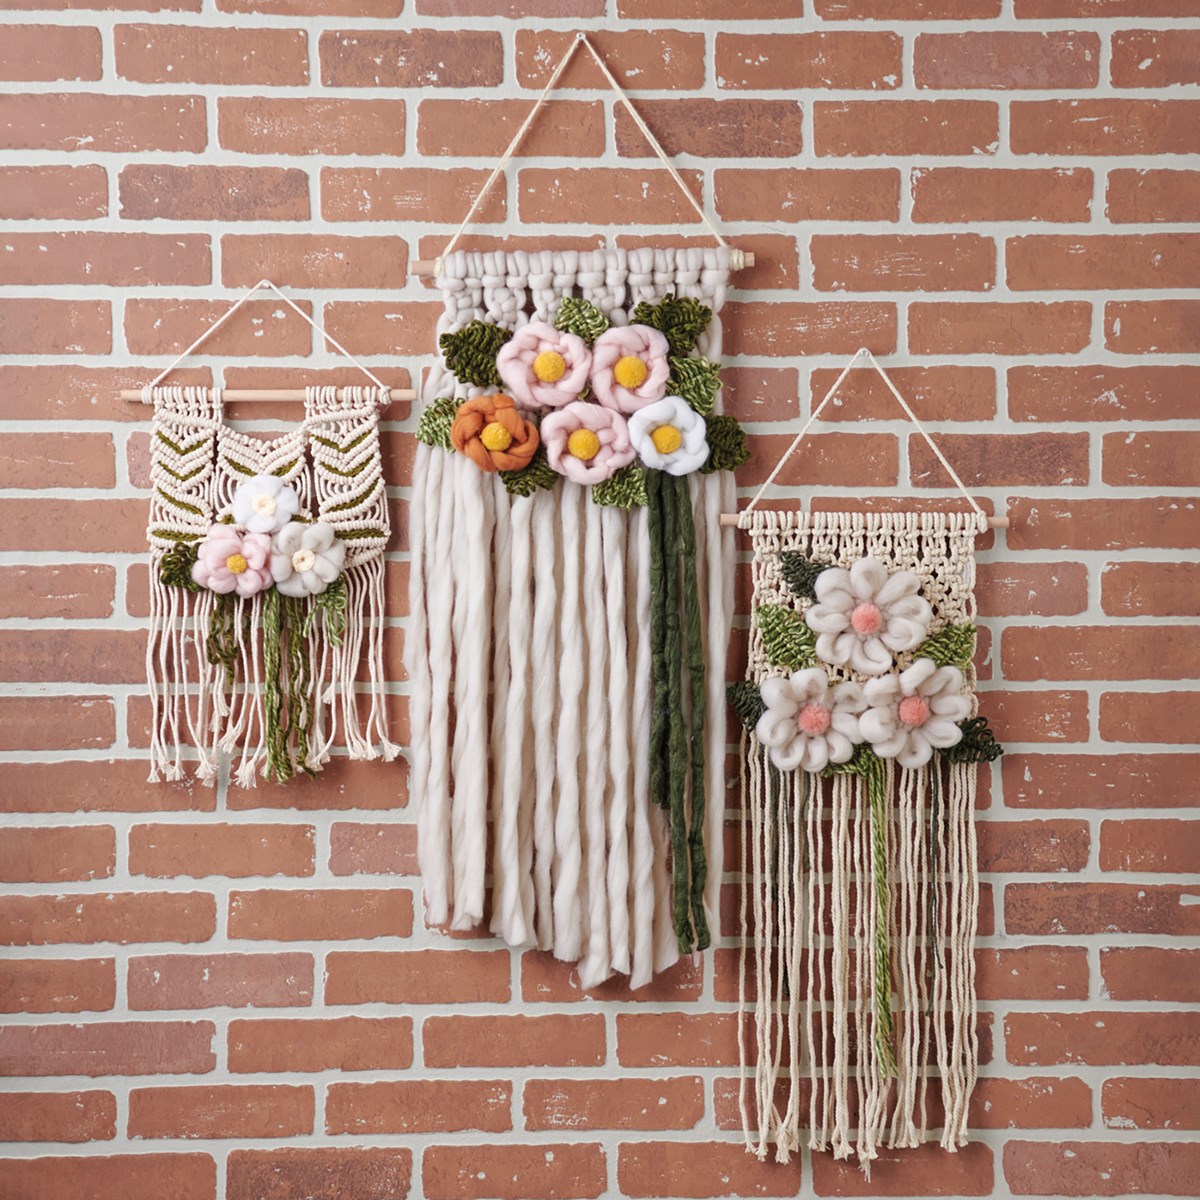 Floral Small Wall Hanging - Polyester, Wood